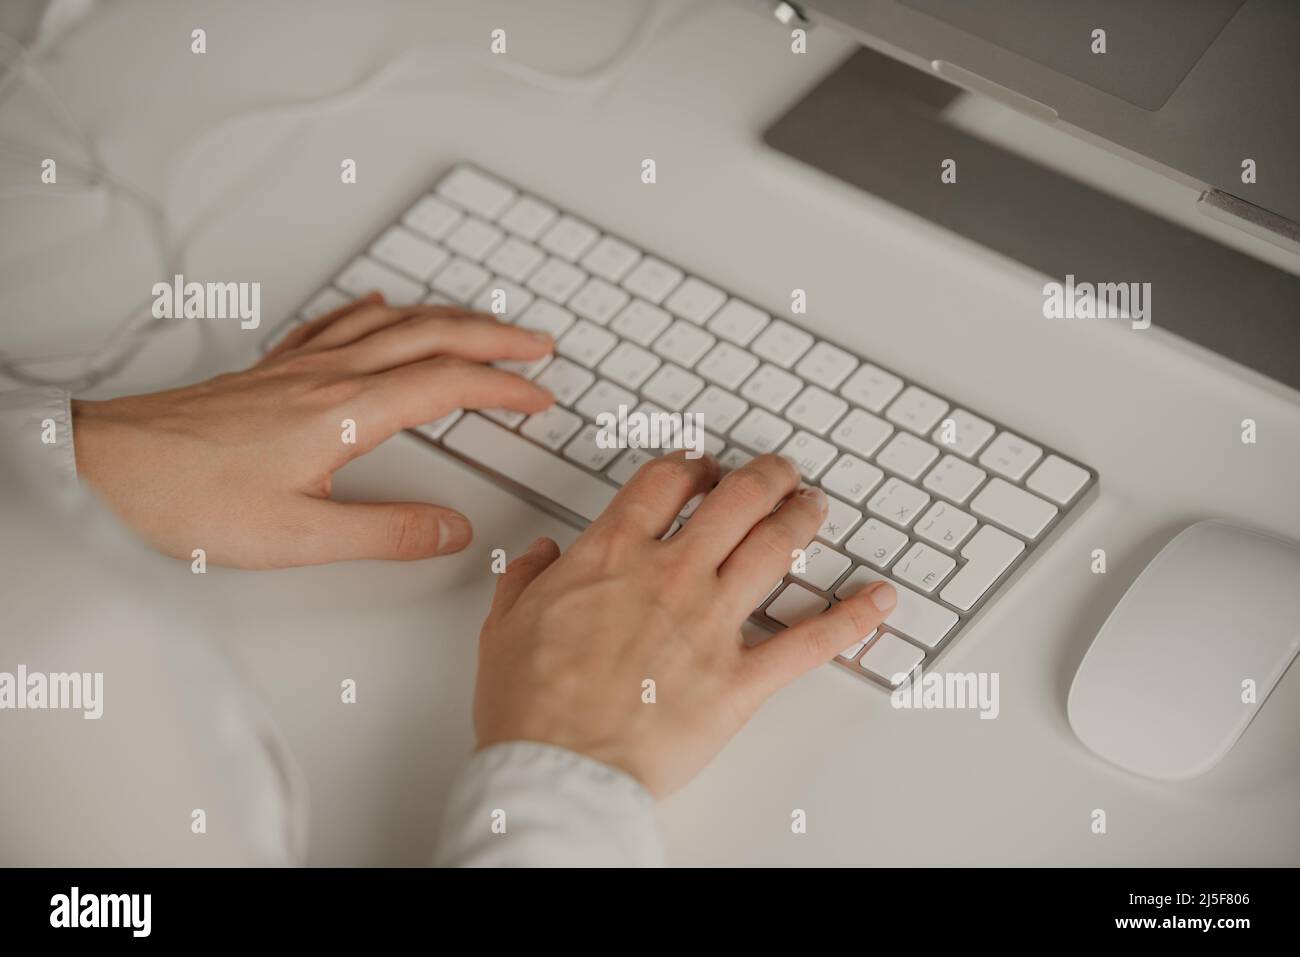 Close-up photo of woman’s hands typing on a wireless white aluminum keyboard Stock Photo